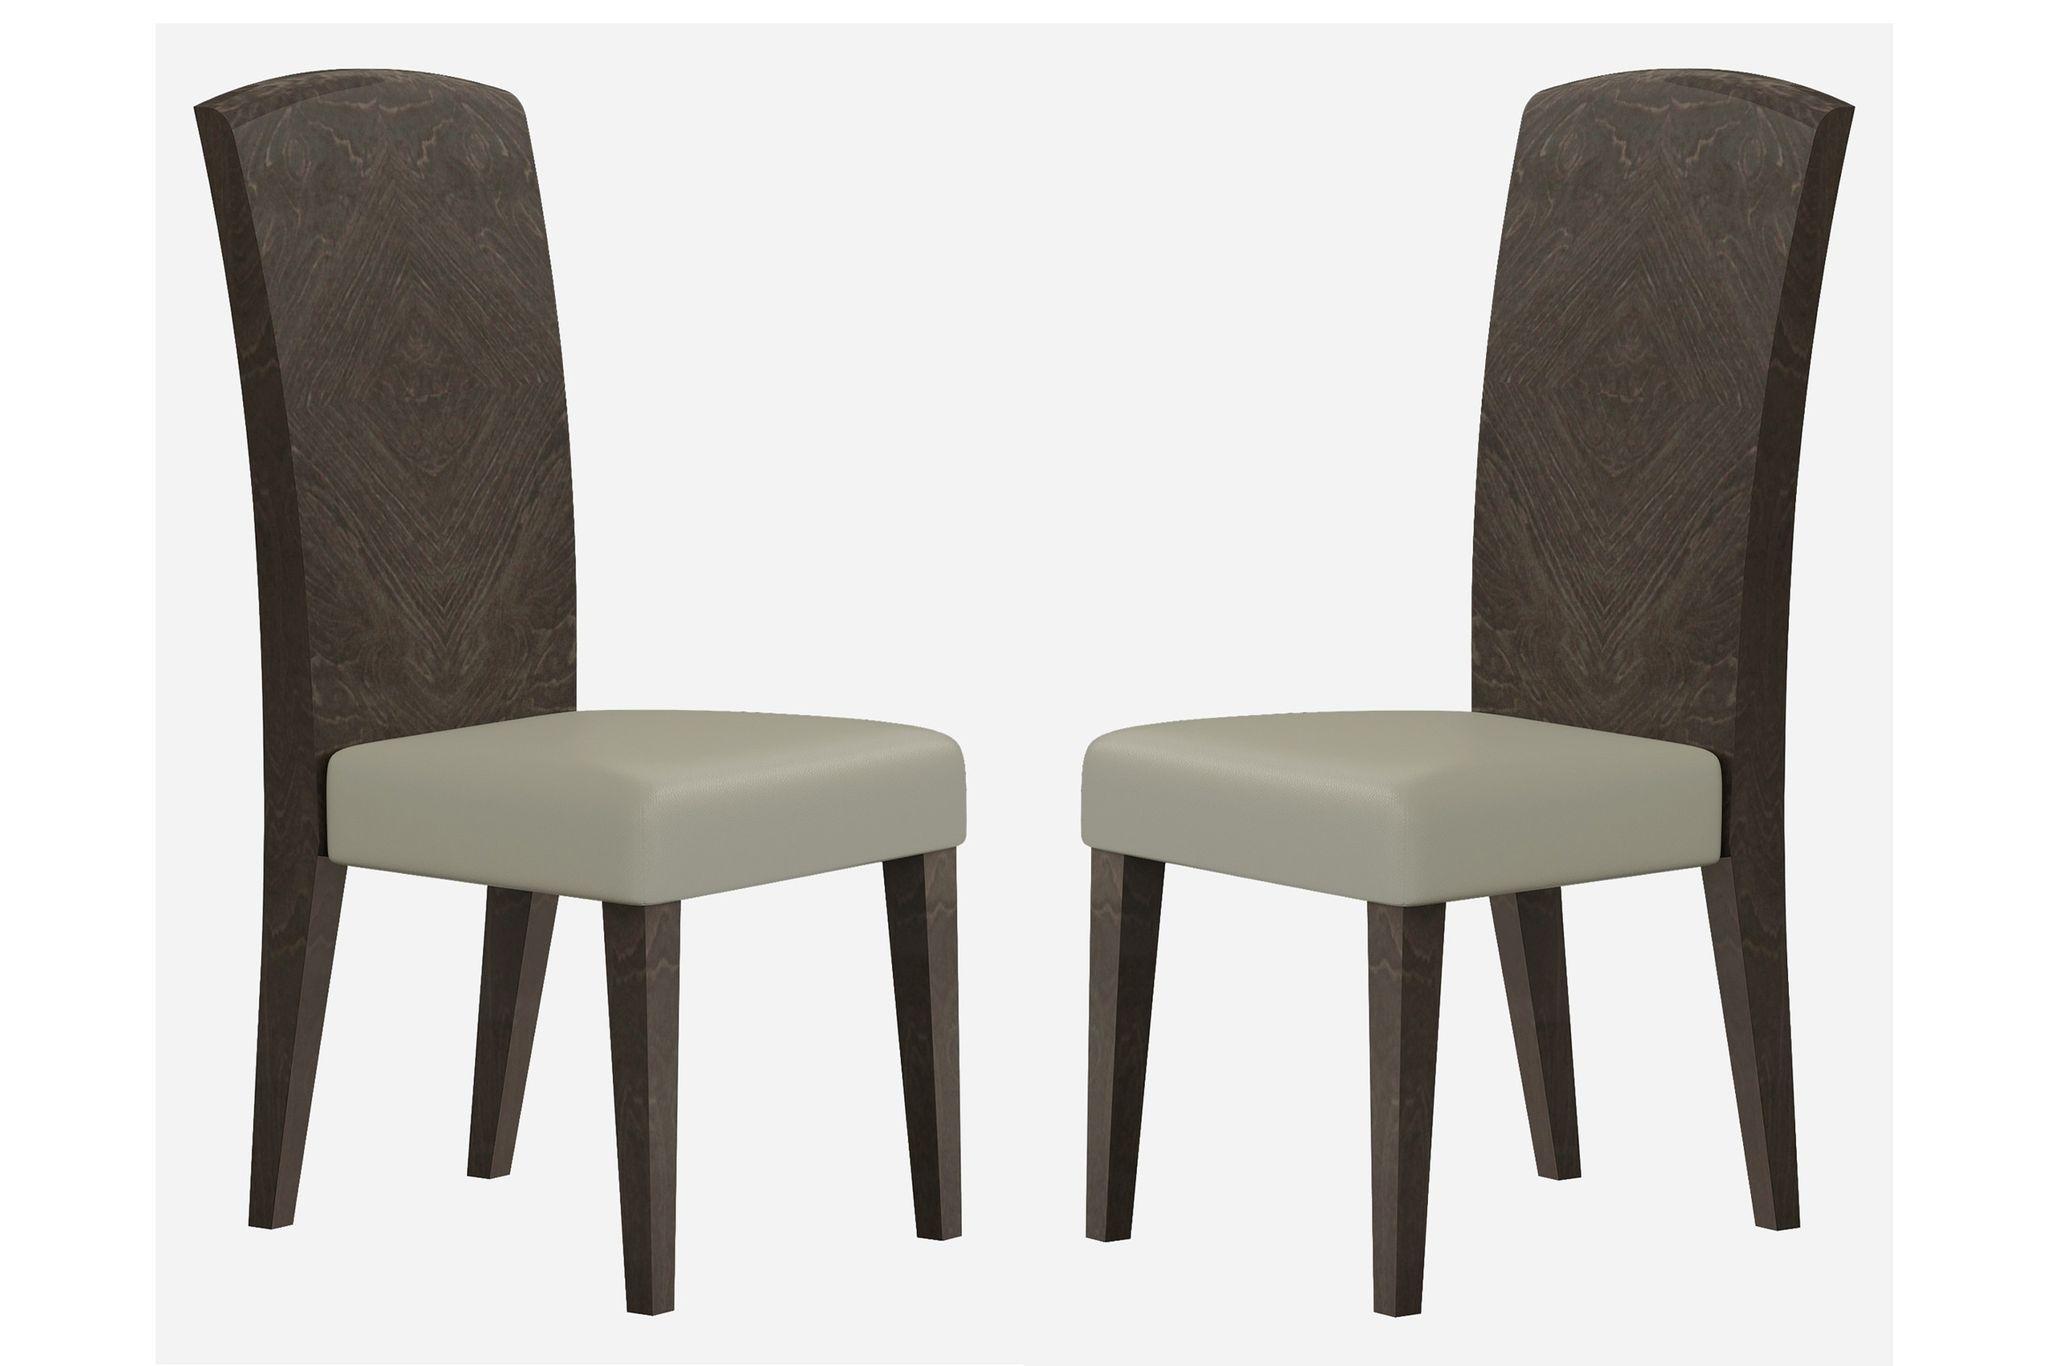 Contemporary Dining Chair Set D845 D845-GRAY-CHAIR-2-PC in Gray, Beige Fabric